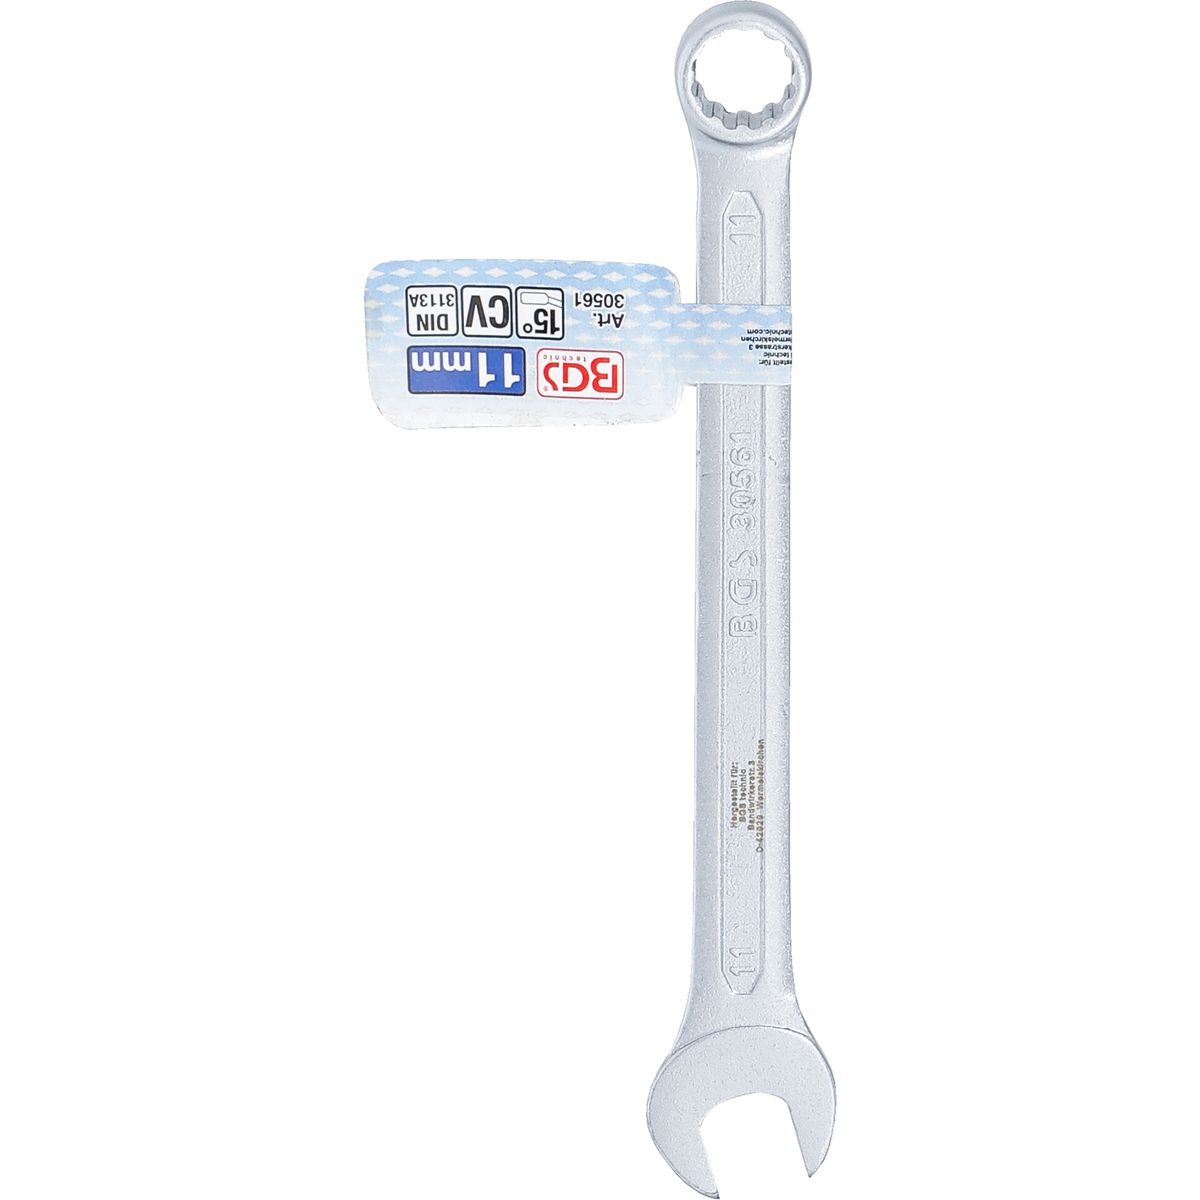 Combination Spanner | 11 mm